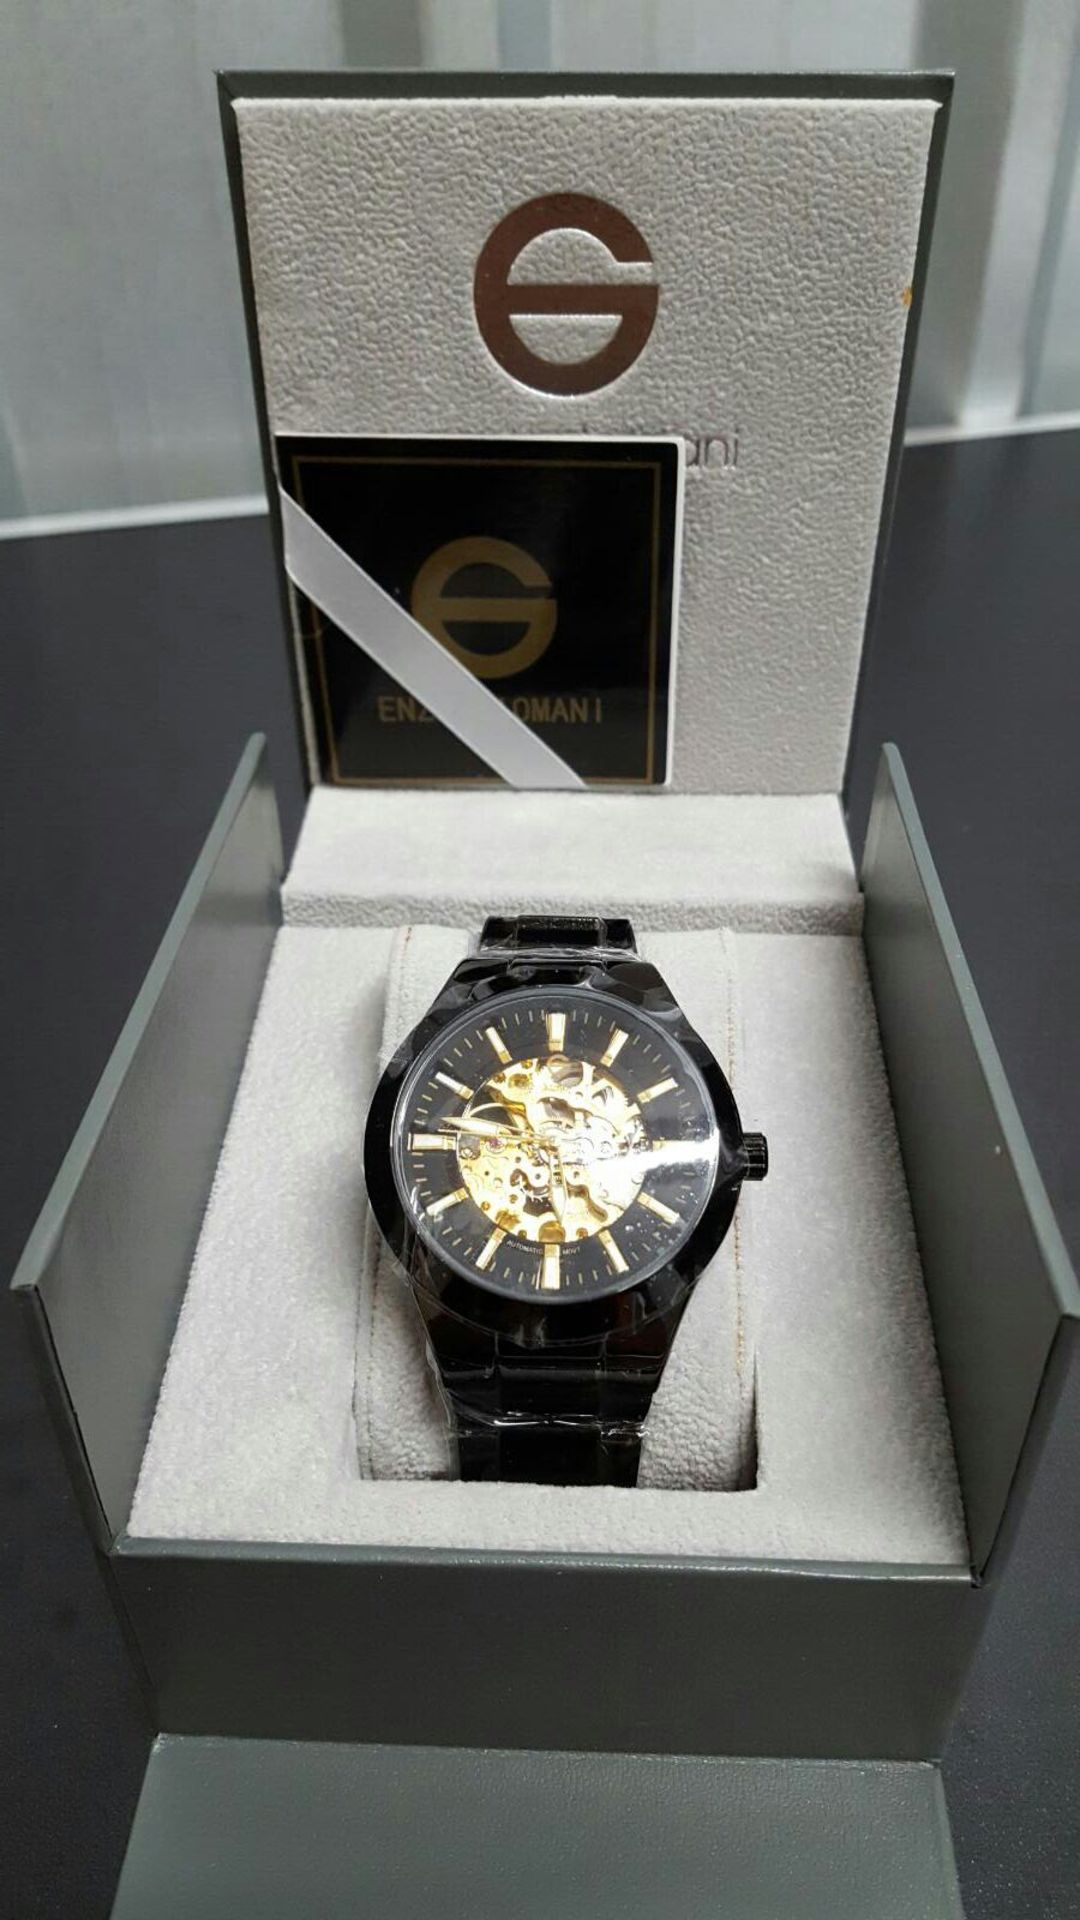 BRAND NEW ENZO GIOMANI EG0021, GENTS BLACK FACE STAINLESS STEEL BRACELET MECHANICO WATCH, COMPLETE - Image 2 of 2